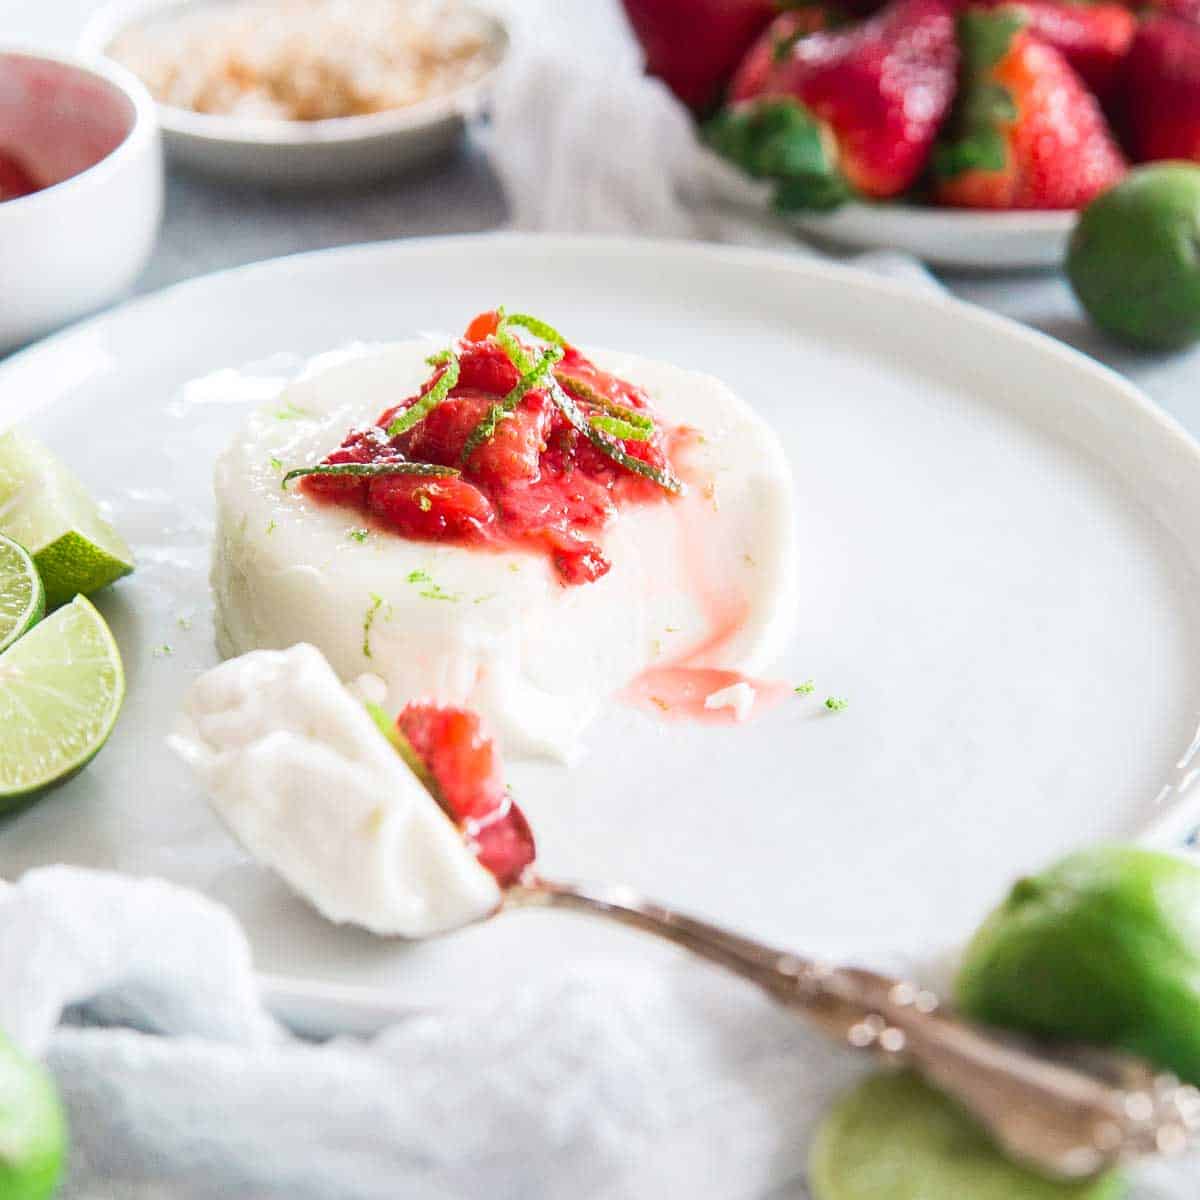 Try this coconut key lime panna cotta with strawberry key lime compote for a stunning restaurant worthy dessert.